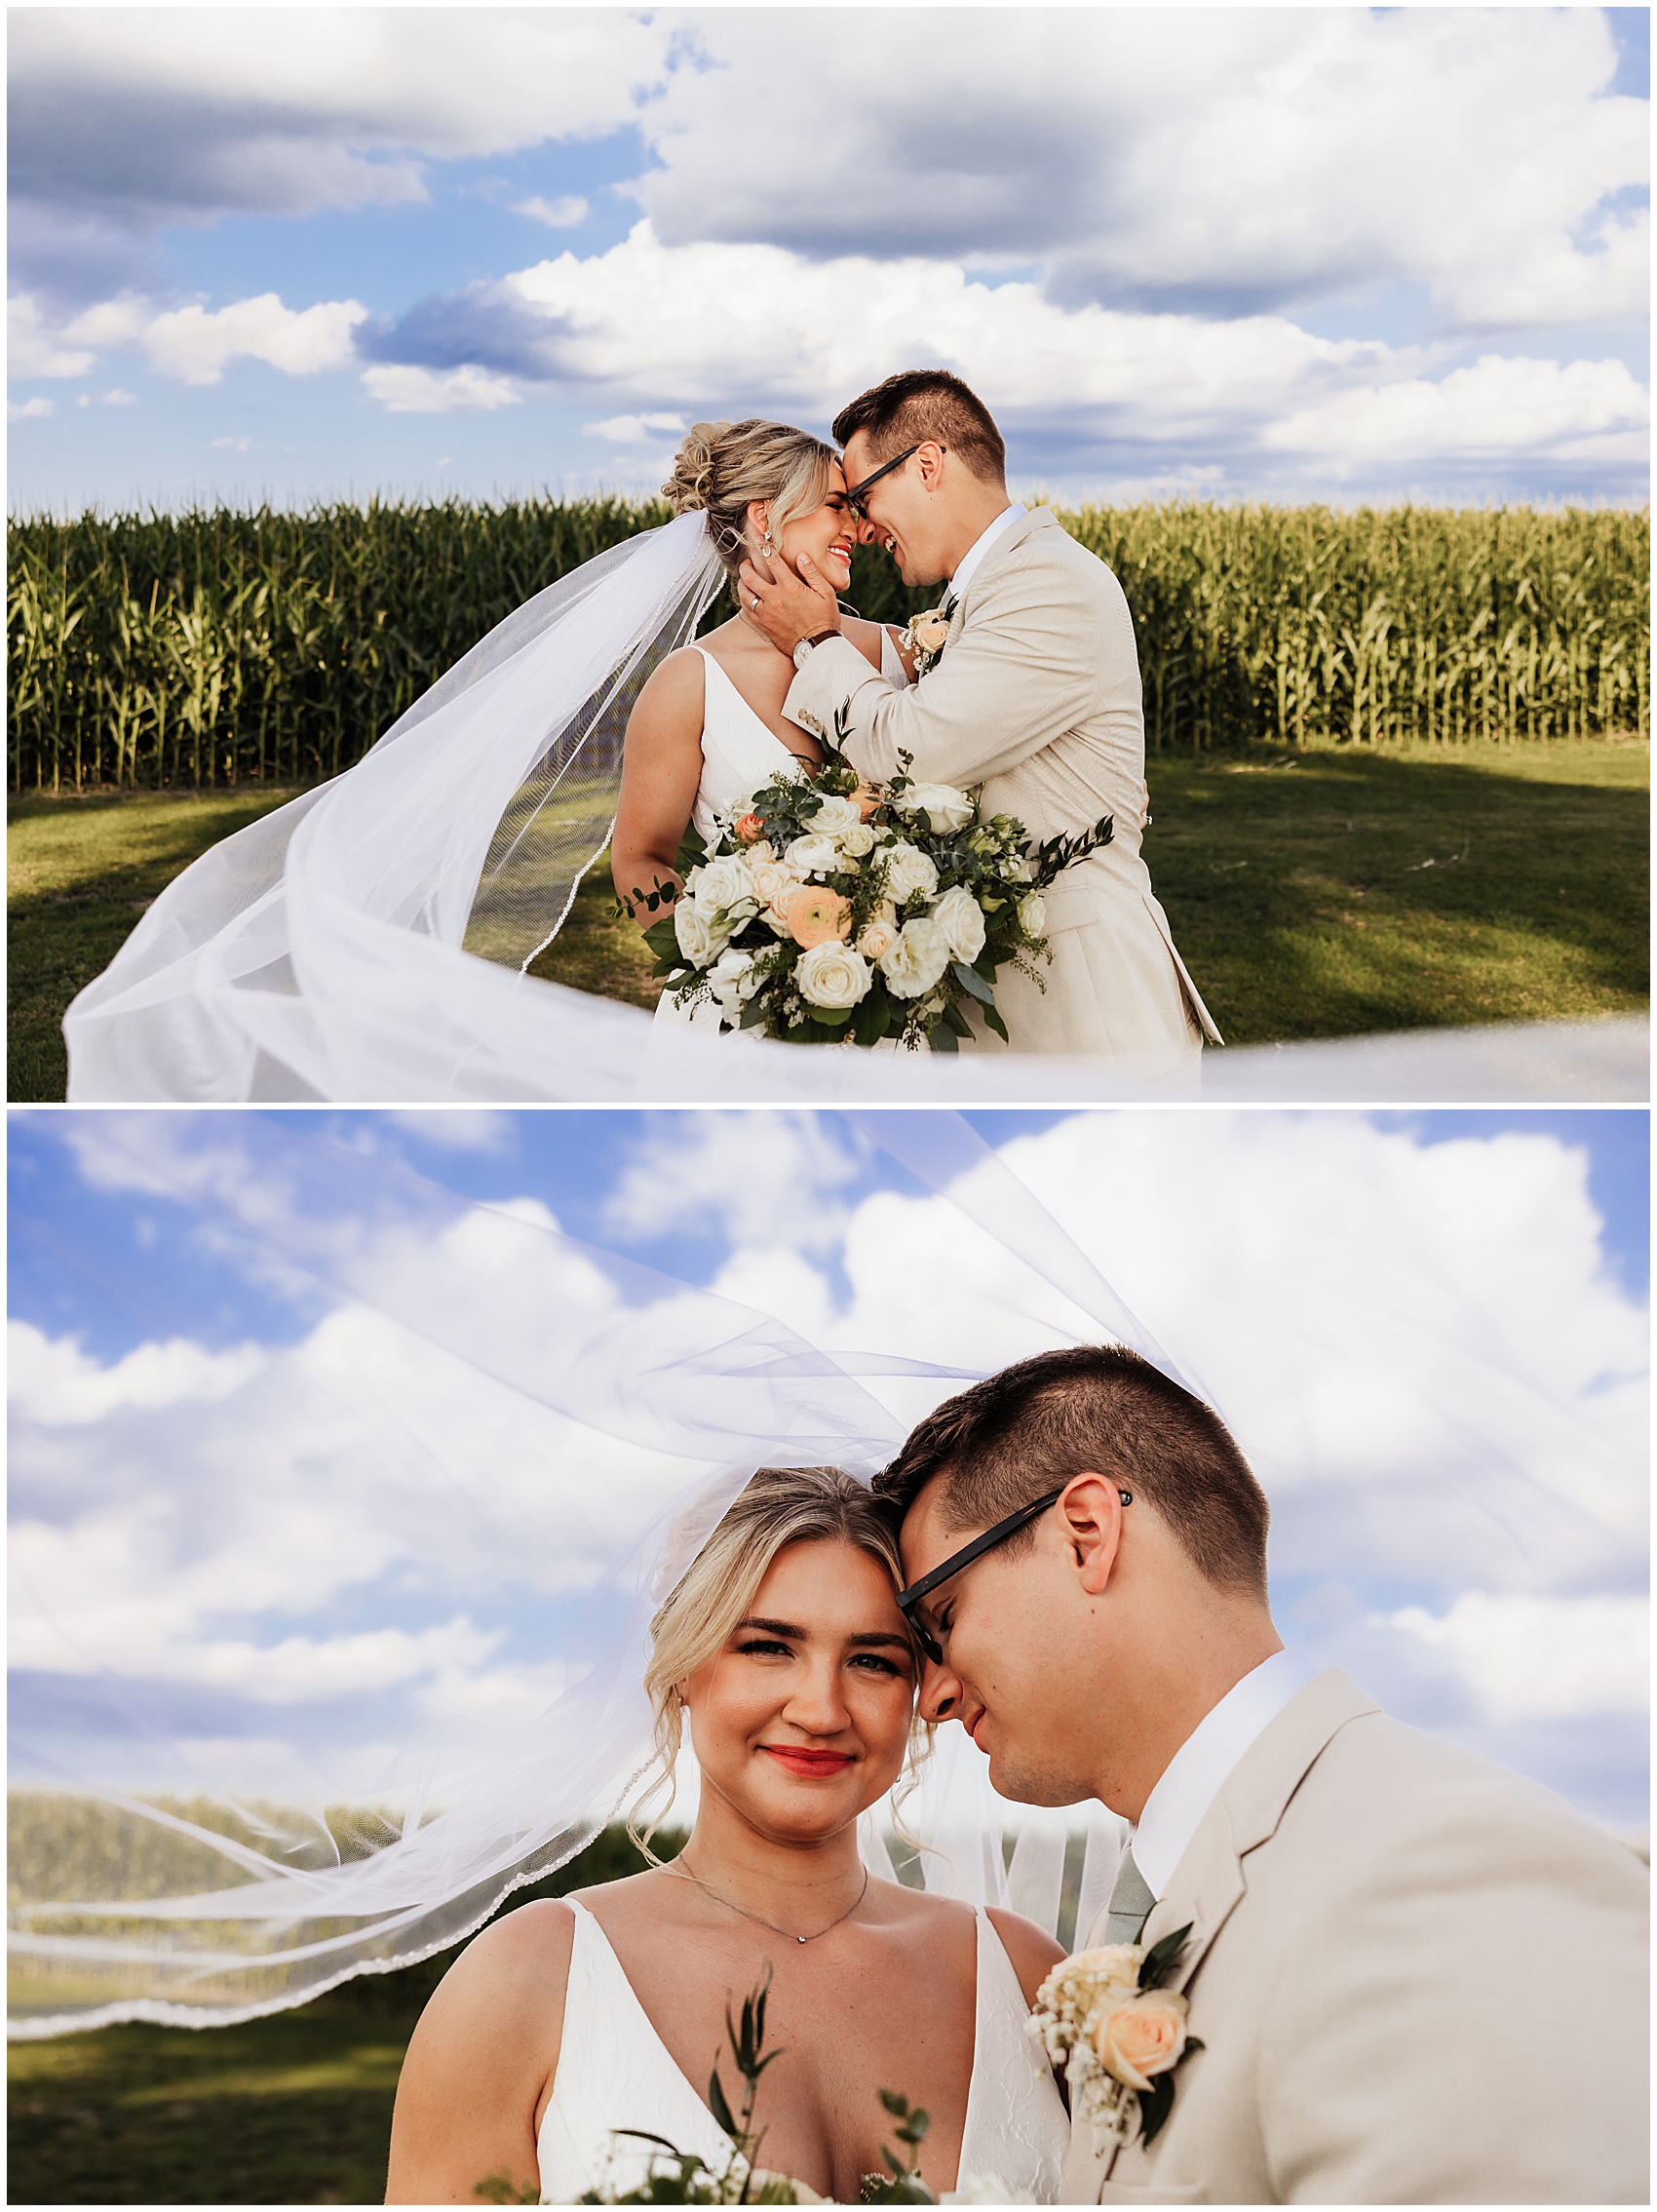 Newlyweds lean in for a kiss under the veil at their cornfield wedding